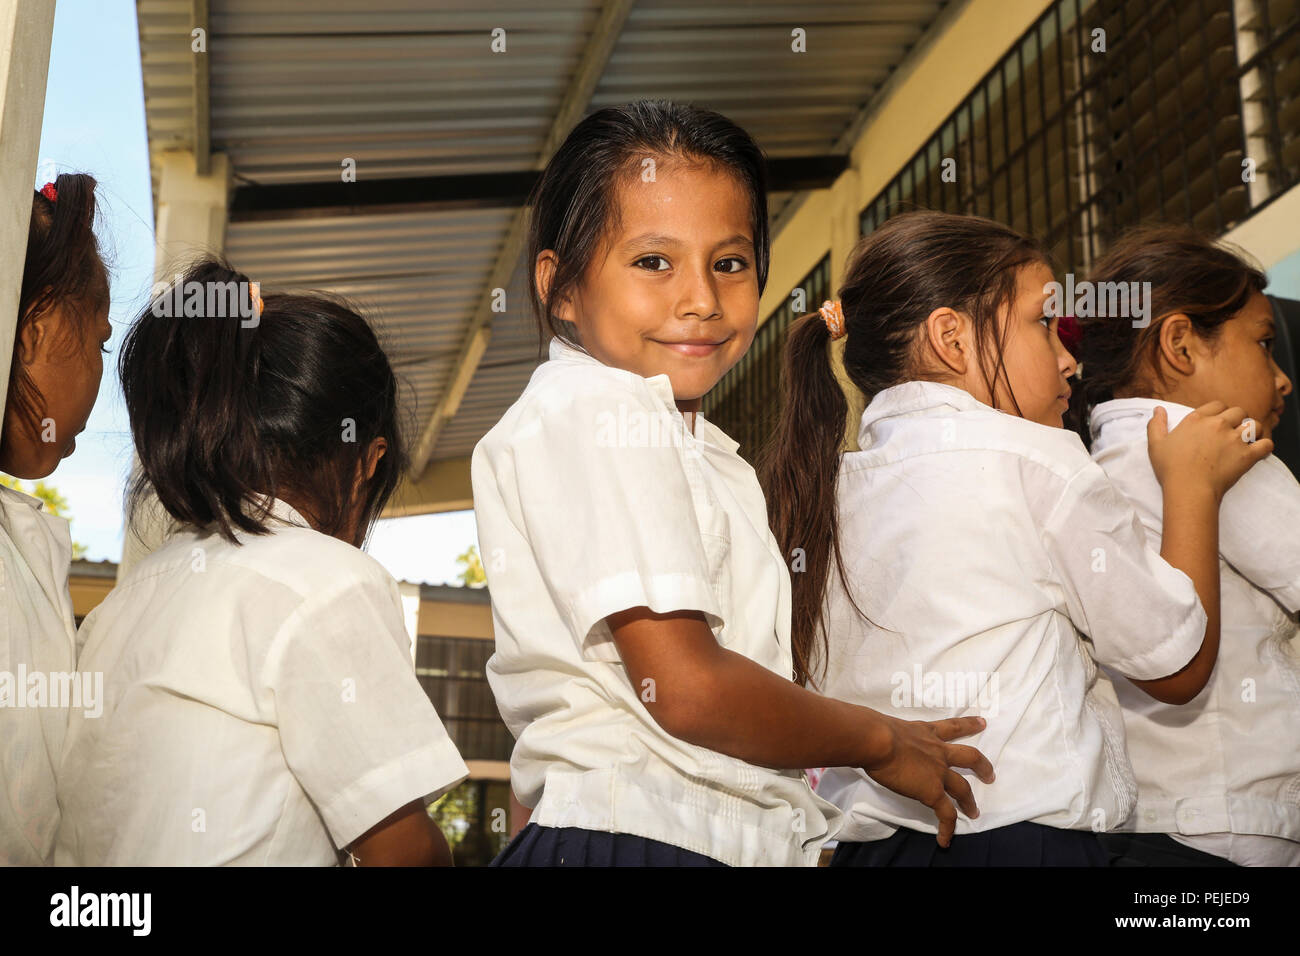 Students from Jairo Ayala School in Trujillo, Honduras, wait in line to receive a dental hygiene class on Aug. 31, 2015.  Members of the U.S. Navy donated shoes to the students and taught dental and general hygiene classes in support of Operation Continuing Promise. Operation Continuing Promise is a mission in which the United States military works with host nations to provide humanitarian assistance and execute civil-military operations alongside various partner nations within the Caribbean and Central and South America. (U.S. Marine Corps photo by Cpl. Kirstin Merrimarahajara/released) Stock Photo